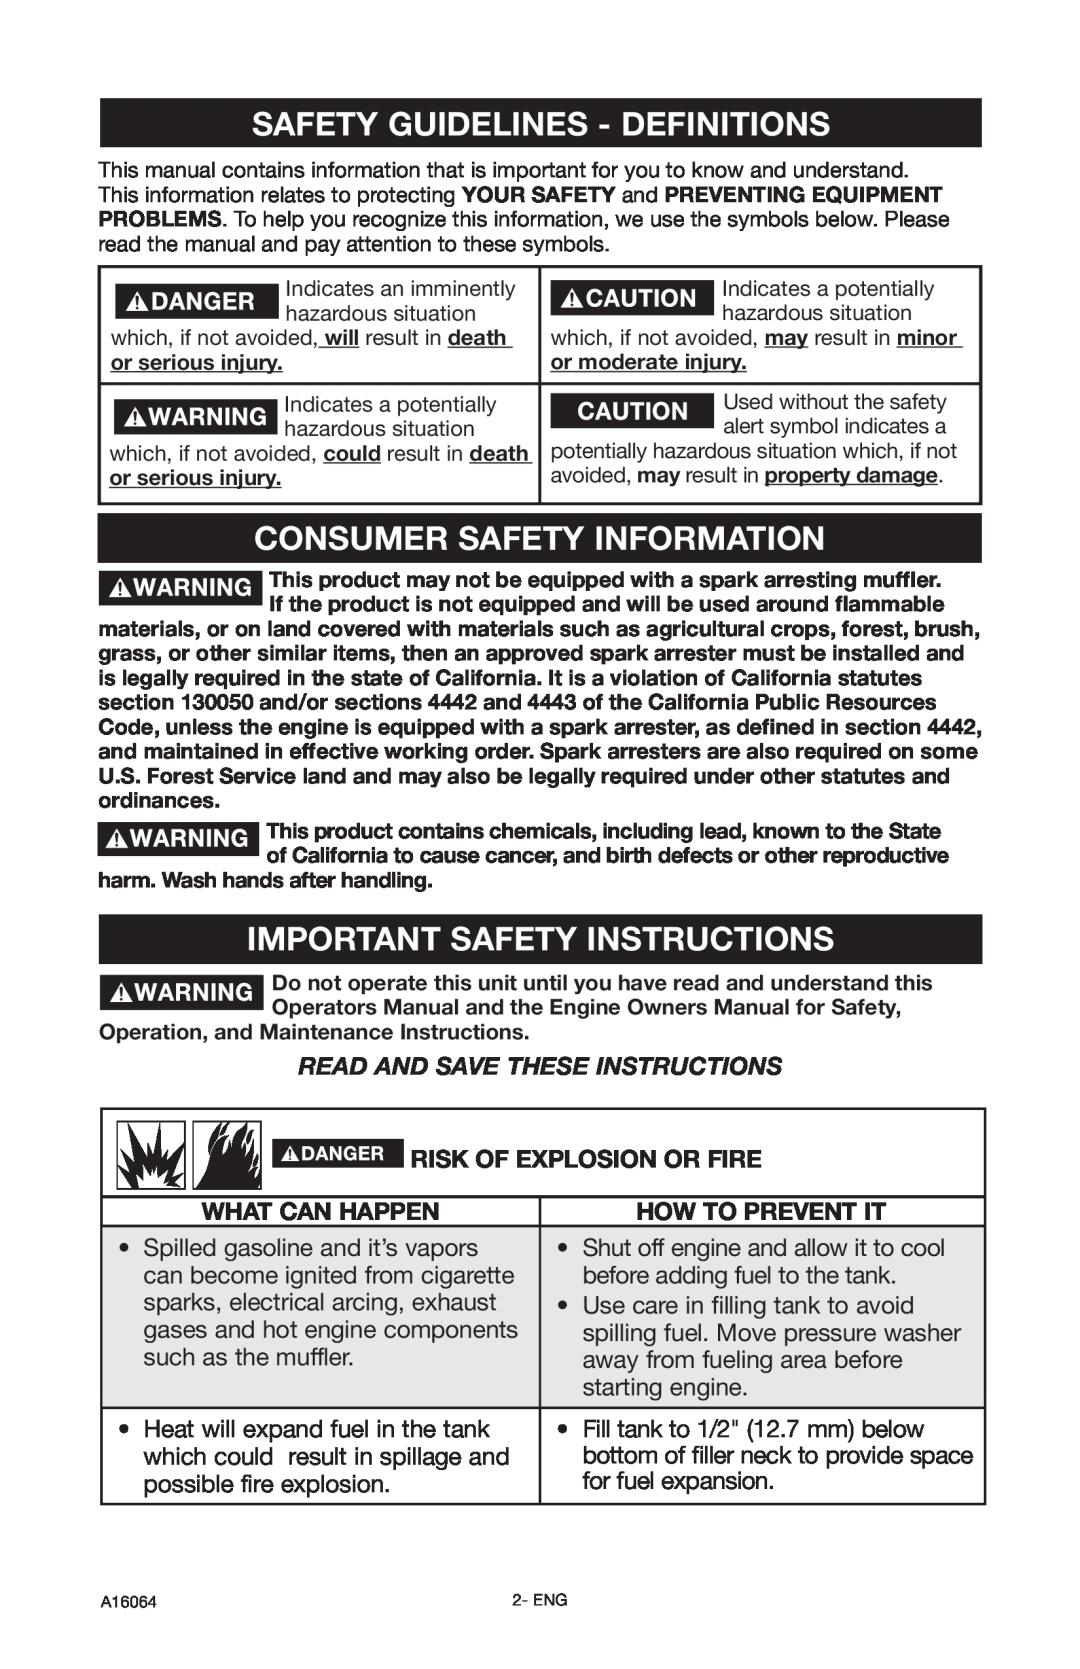 DeVillbiss Air Power Company A16064, DVH2600 Safety Guidelines - Definitions, Consumer Safety Information, What Can Happen 